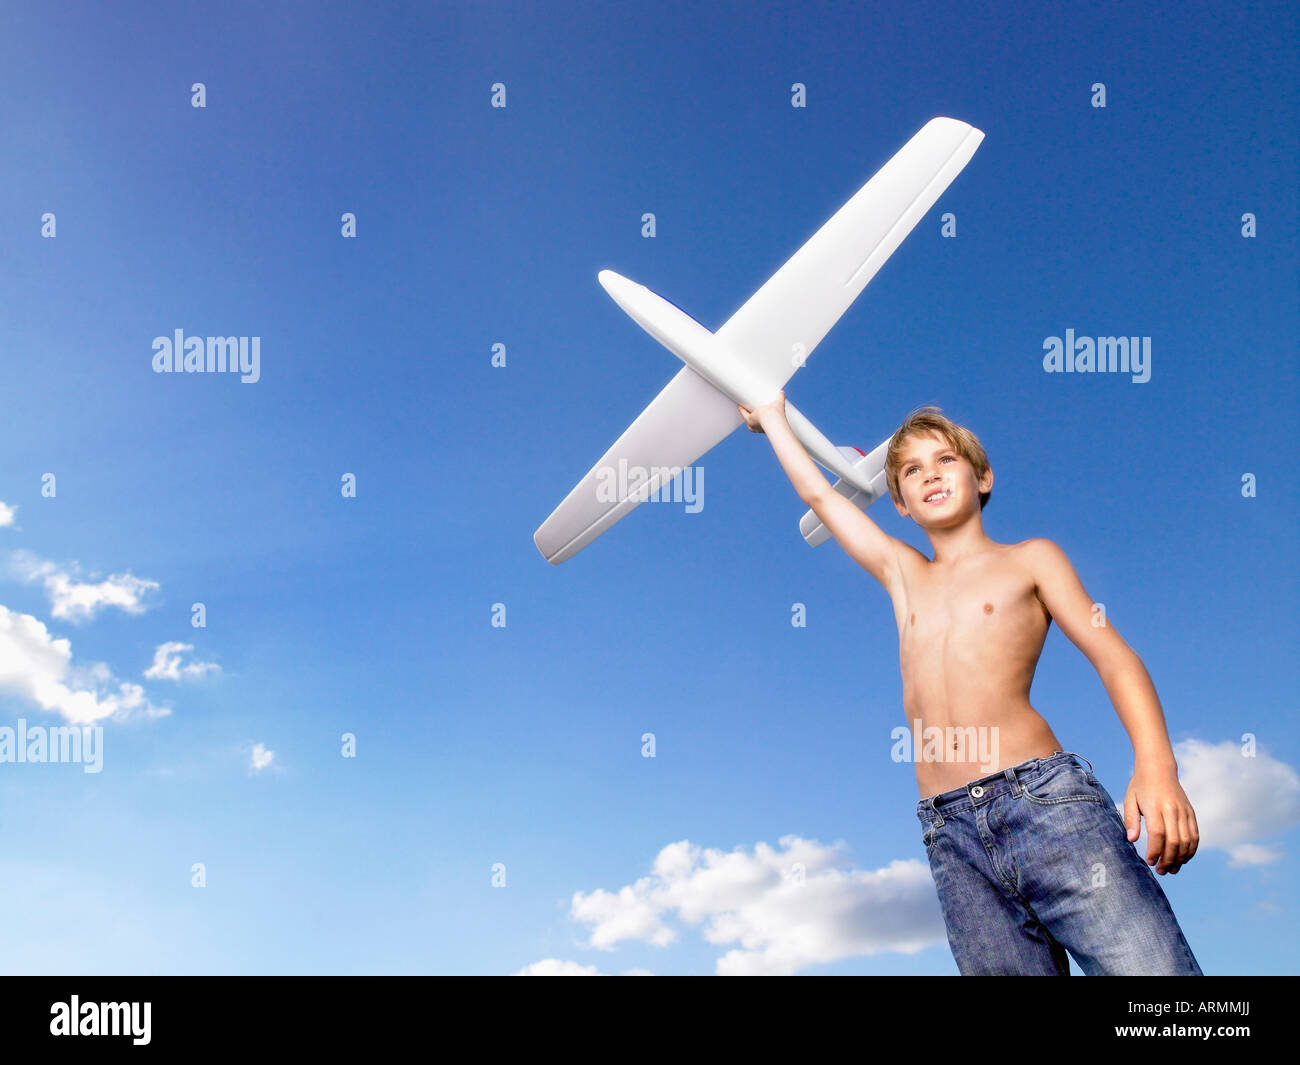 Young boy ready to send off an airplane Stock Photo